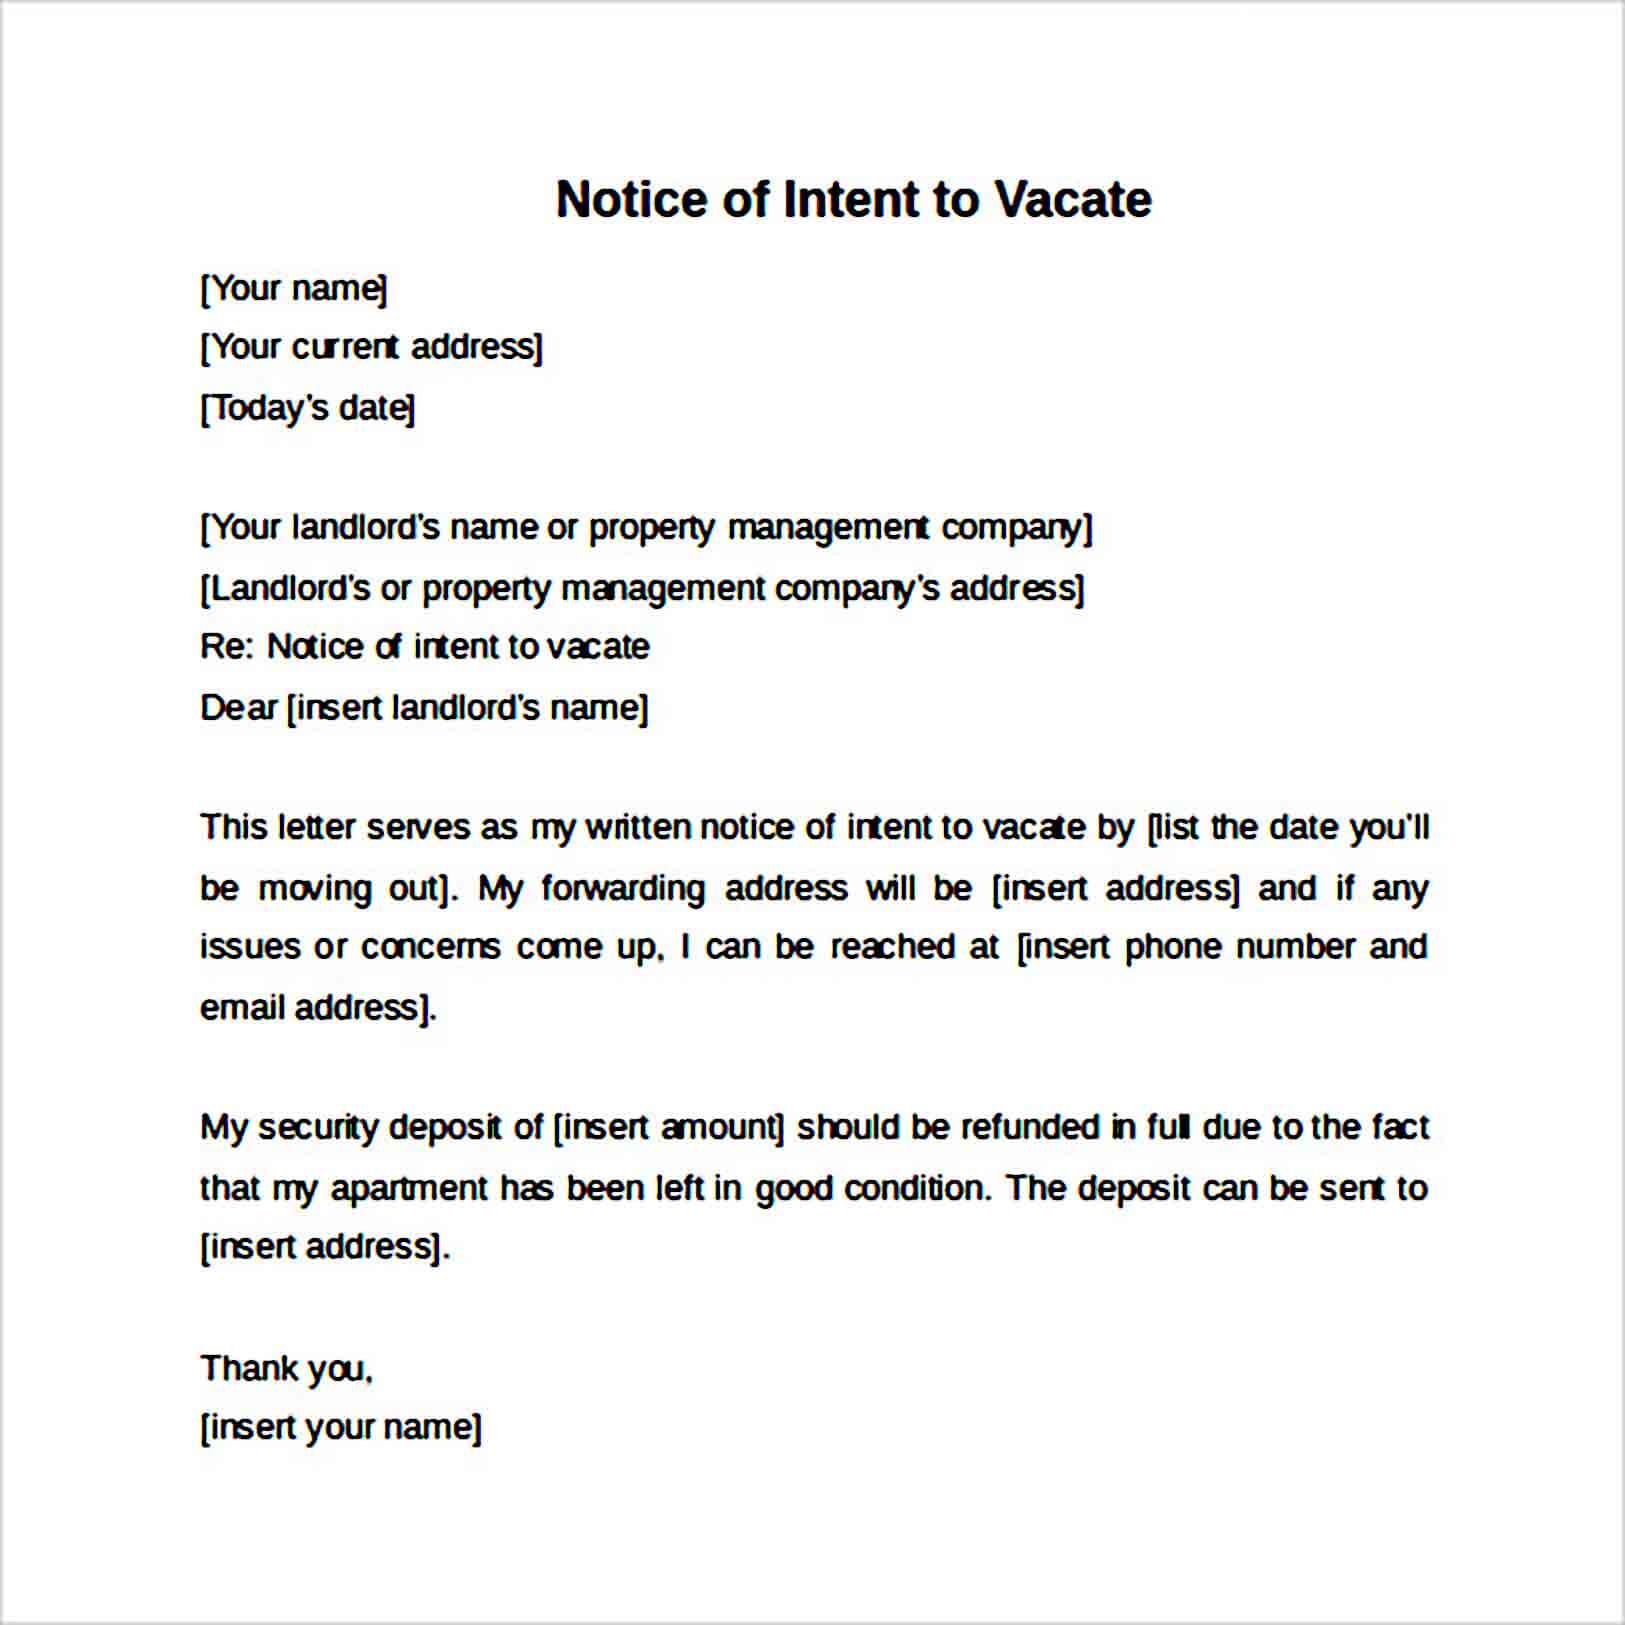 Notice of Intent to Vacate